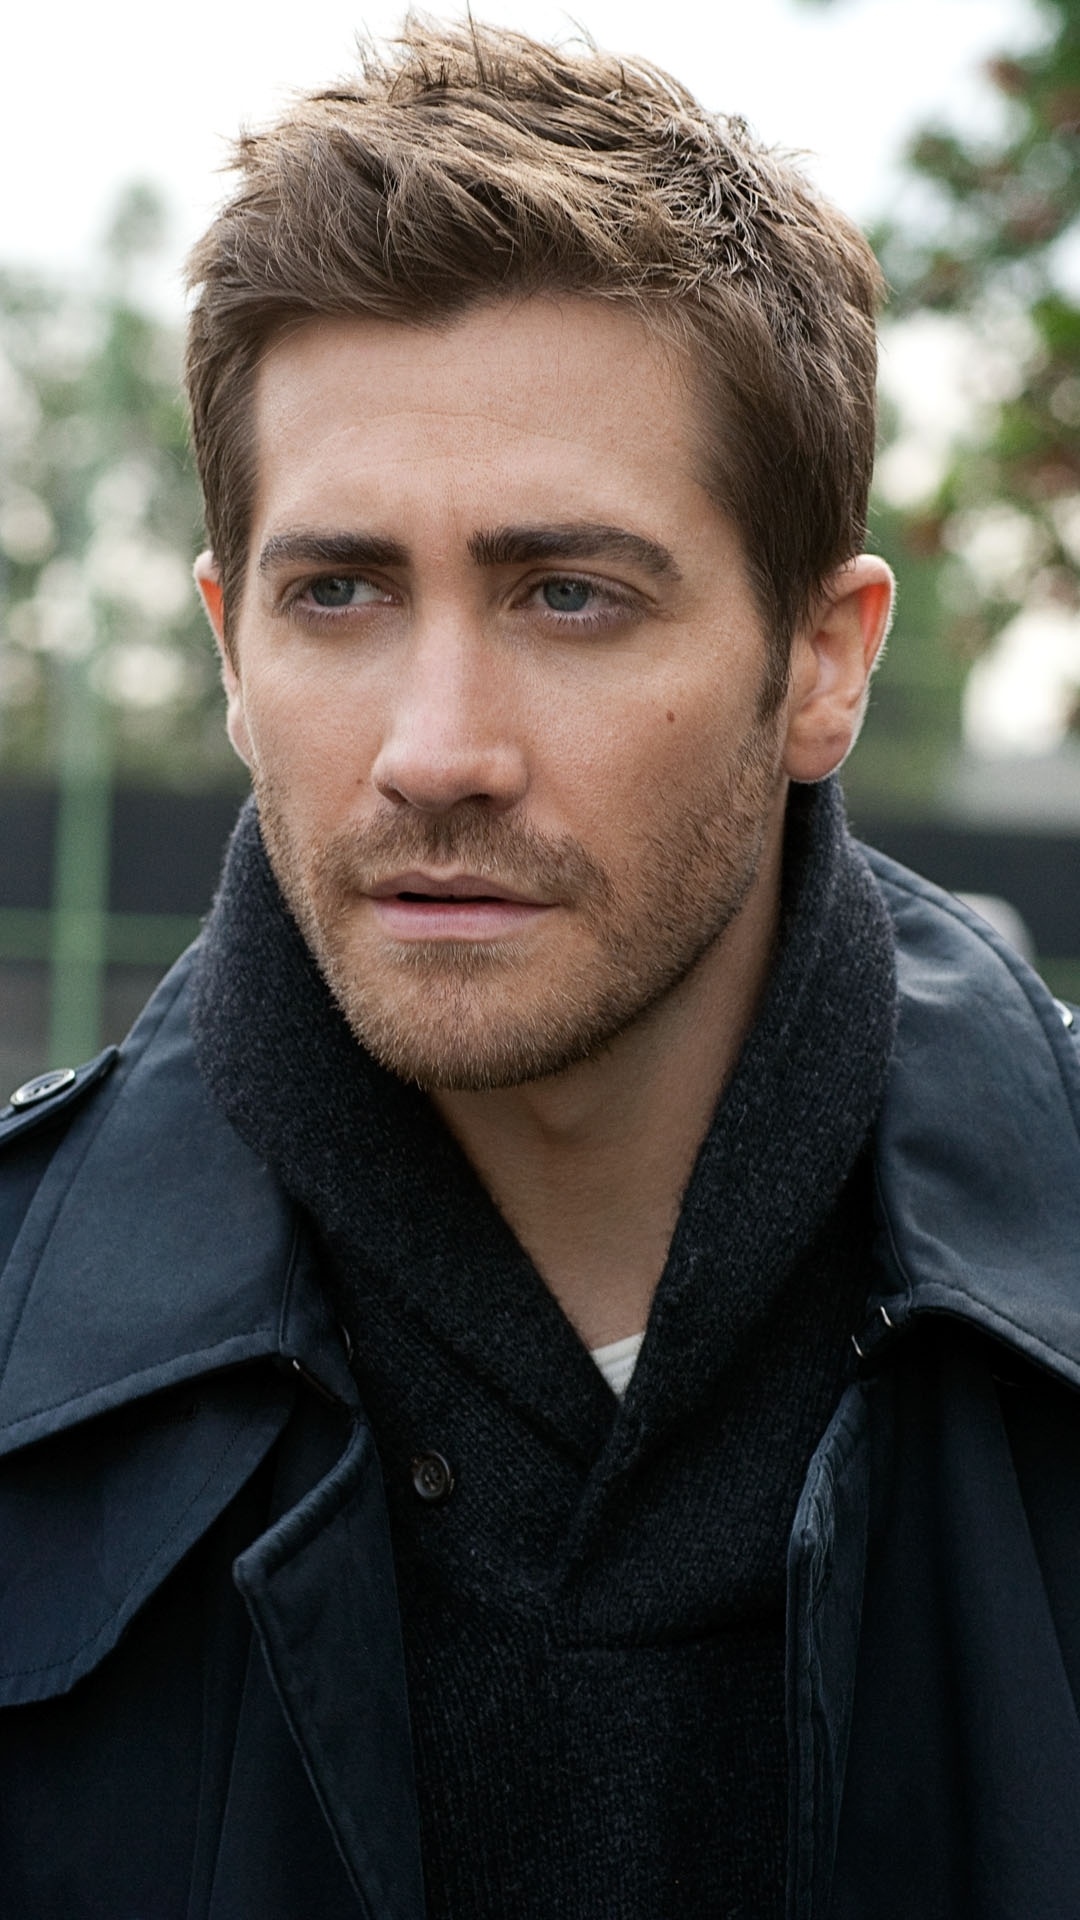 Jake Gyllenhaal: Appeared as Jordan in a 2001 comedy-drama film, Lovely and Amazing. 1080x1920 Full HD Wallpaper.